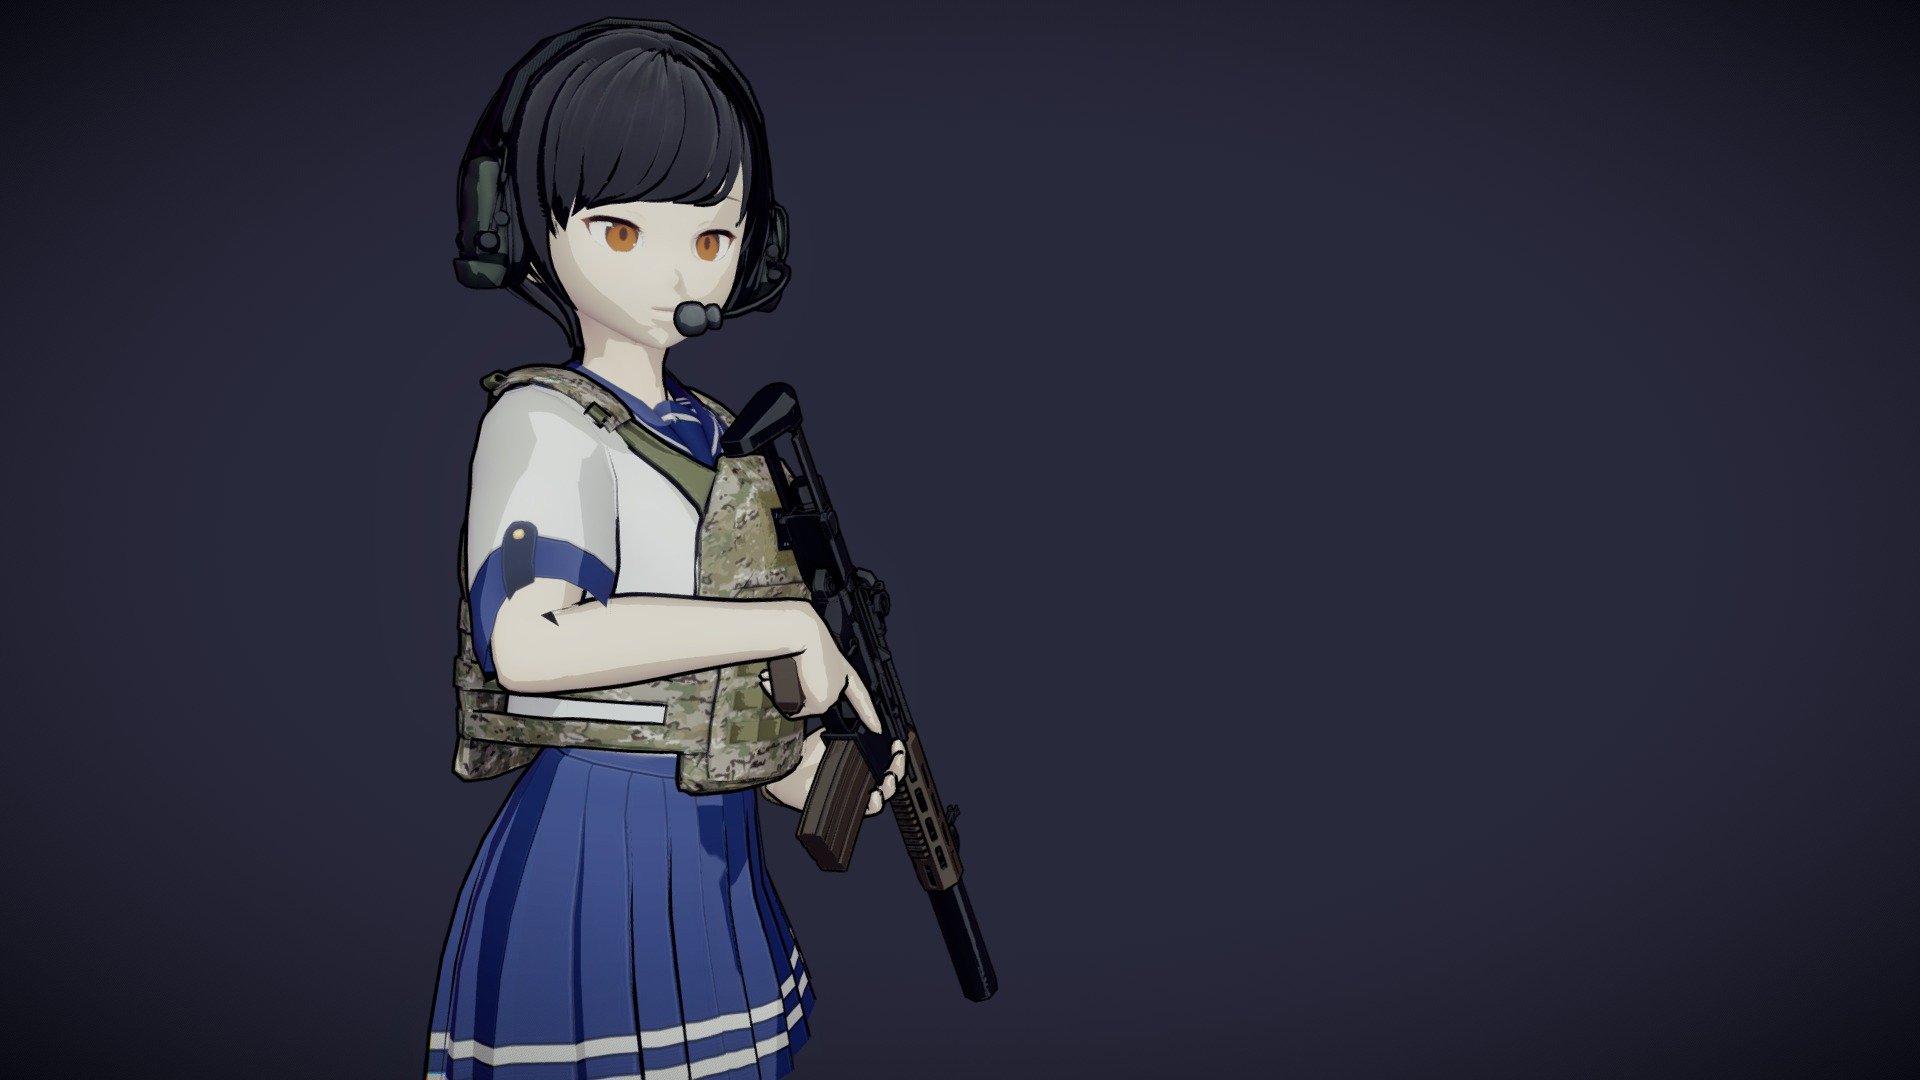 Anime character in school uniform with military gear and rifle.


T-Pose version is included in additional files.

Keep in mind that the outline is done with the mesh which effectively doubles the poly count.

Model was based on mesh and textures from Vroid Studio.

Rifle is AAC Honey Badger by TastyTony shared under CC-BY licence.

Watch is available for free in realistic, PBR version. You can grab it in here: Digital Watch - Animu Operator - Buy Royalty Free 3D model by Mateusz Woliński (@jeandiz) 3d model